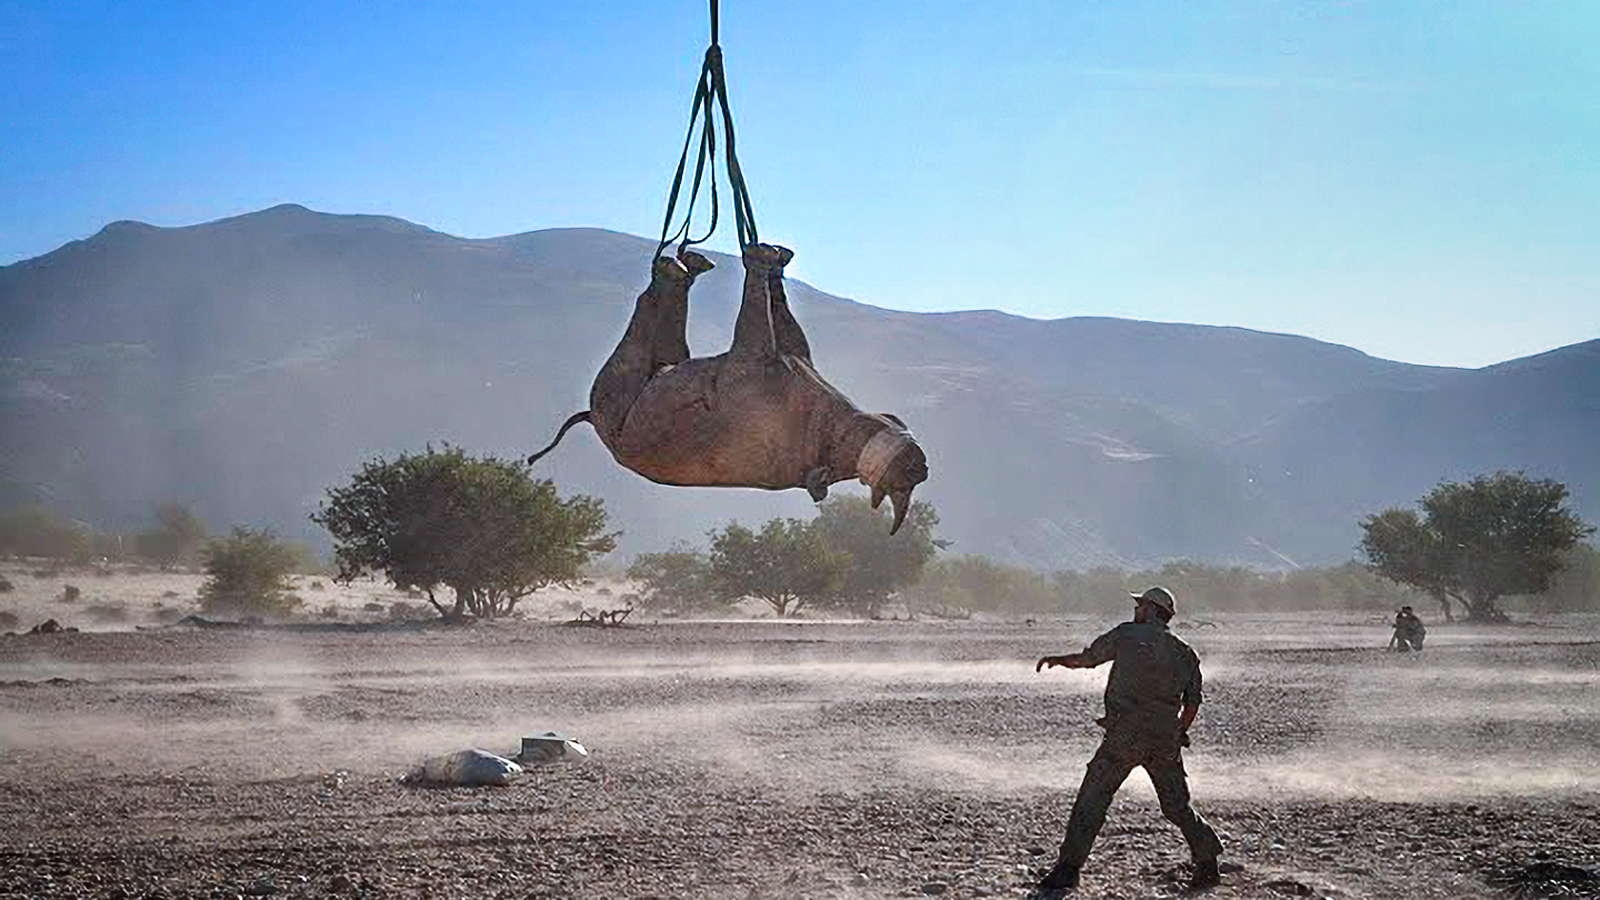 A rhino hanging upside down, with a man in the foreground